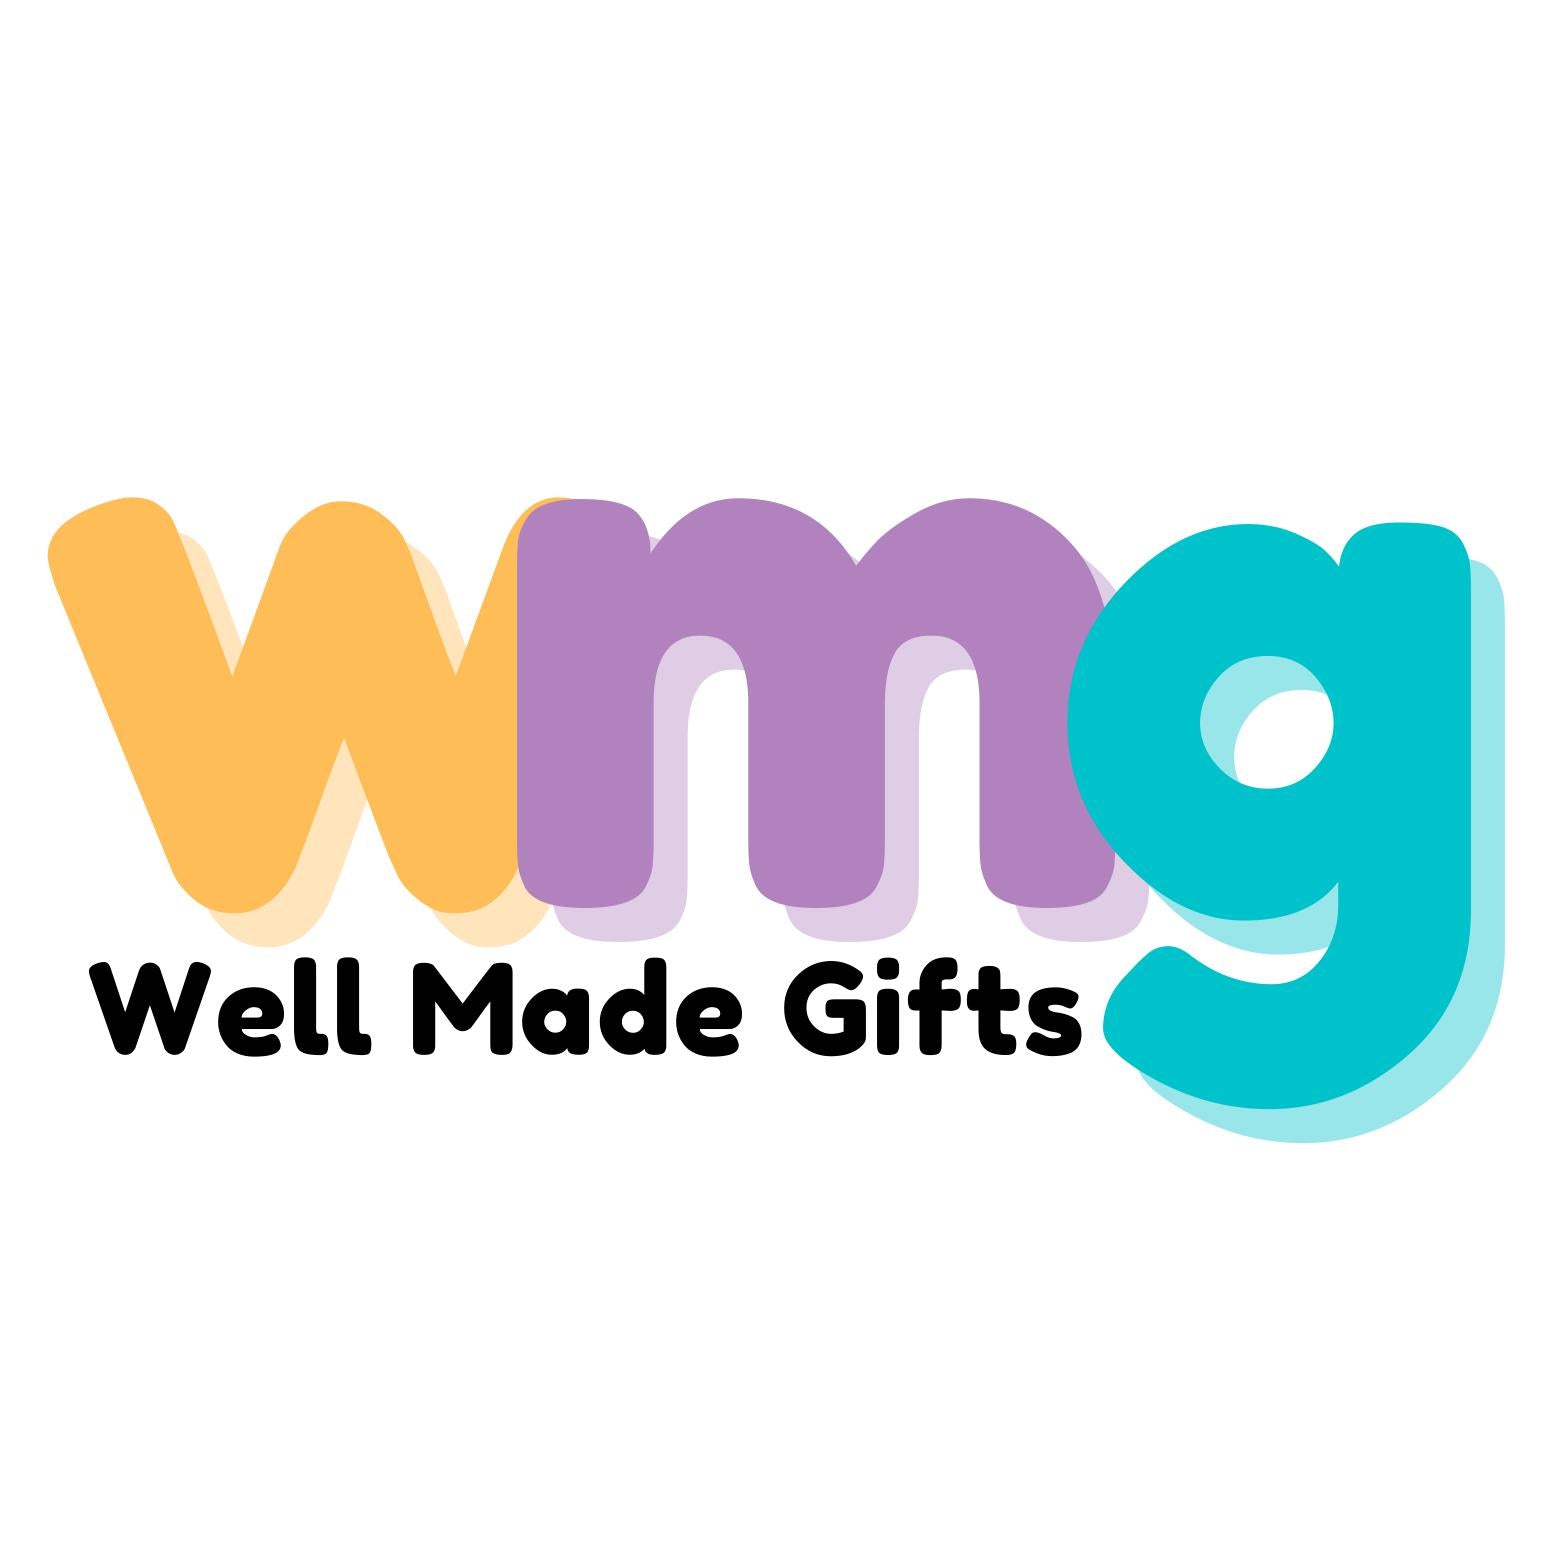 Well Made Gifts